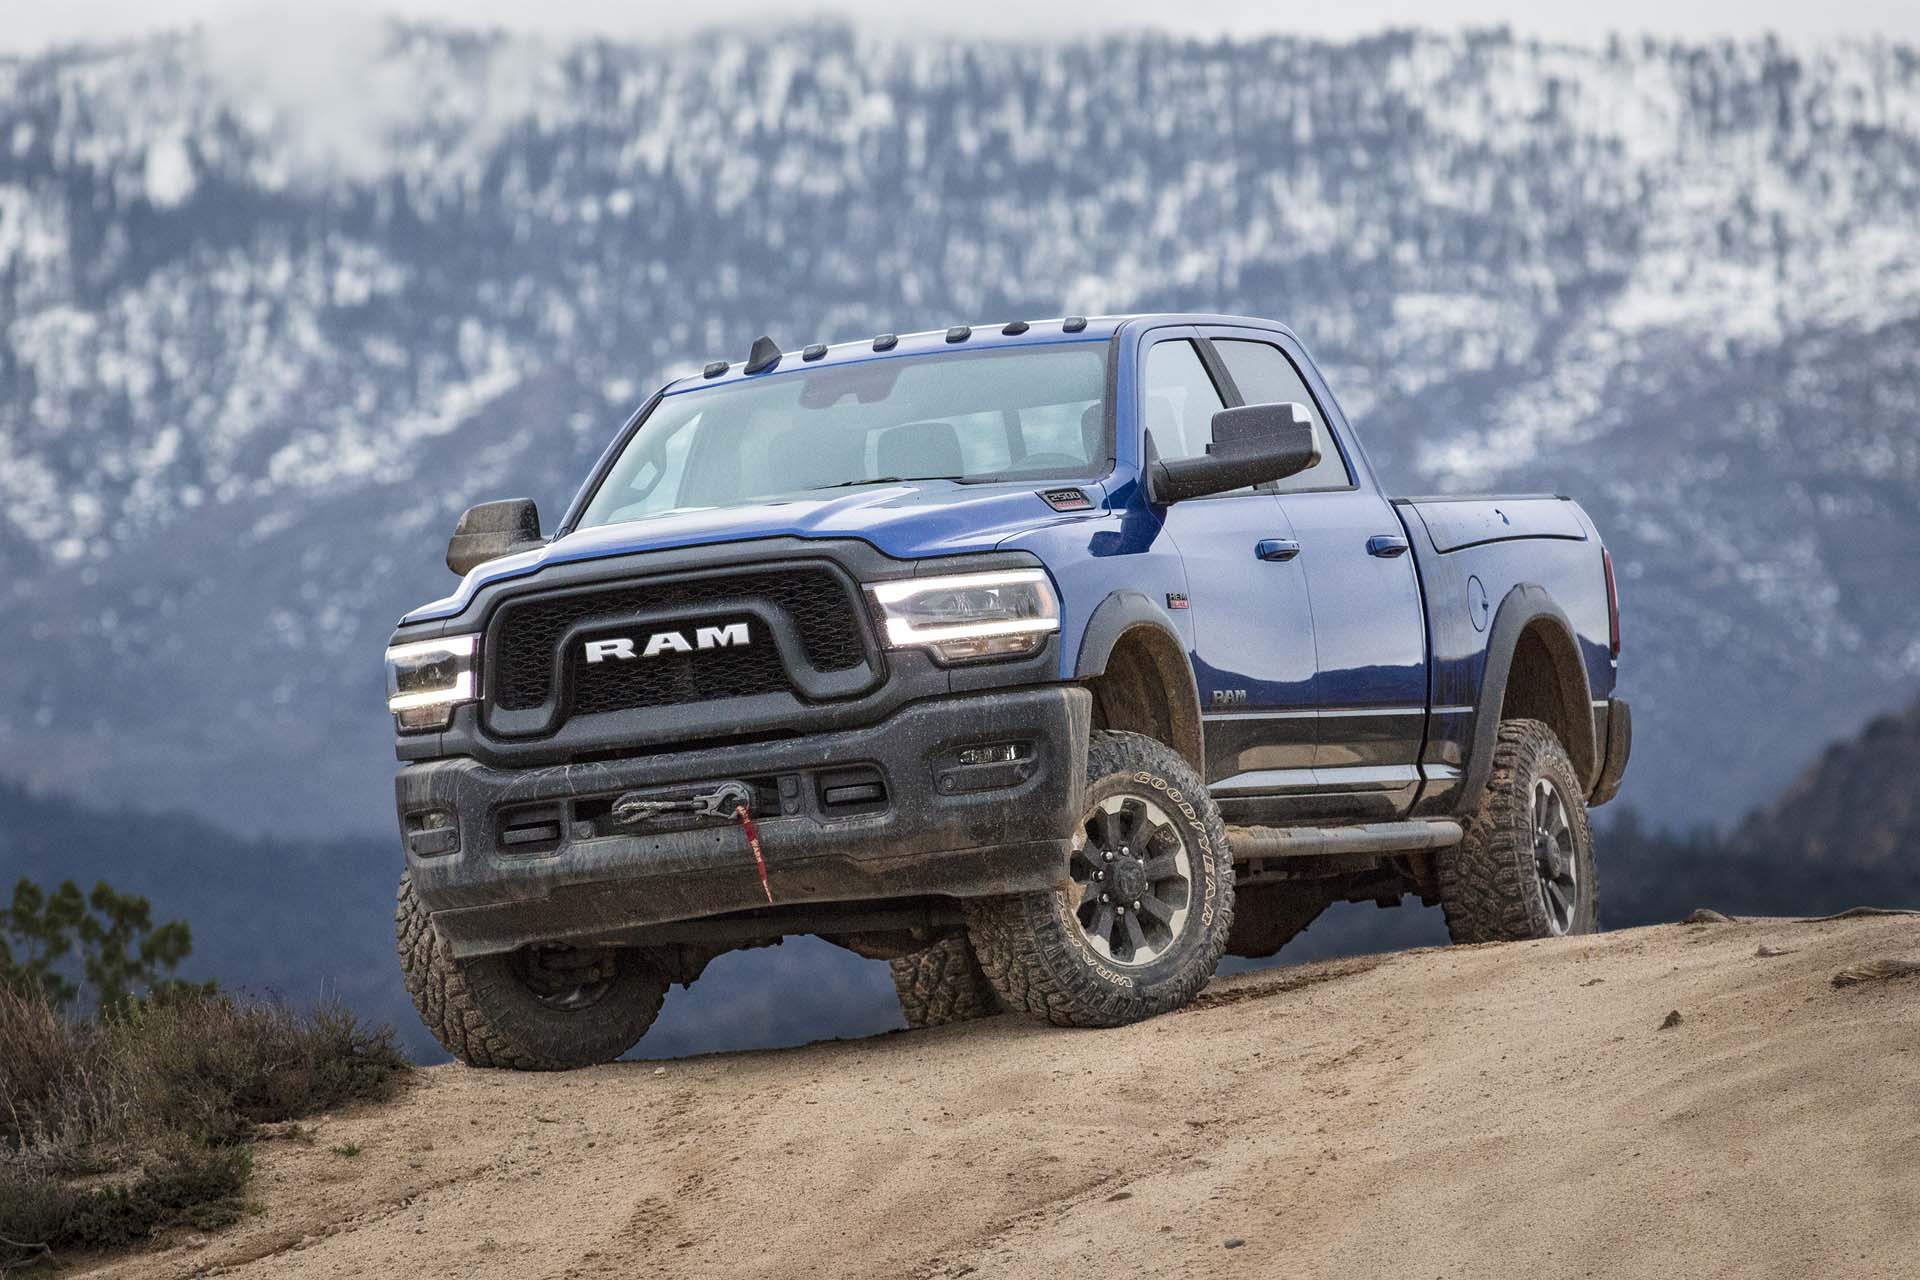 First drive review: 2019 Ram 2500 Power Wagon conquers nearly anything